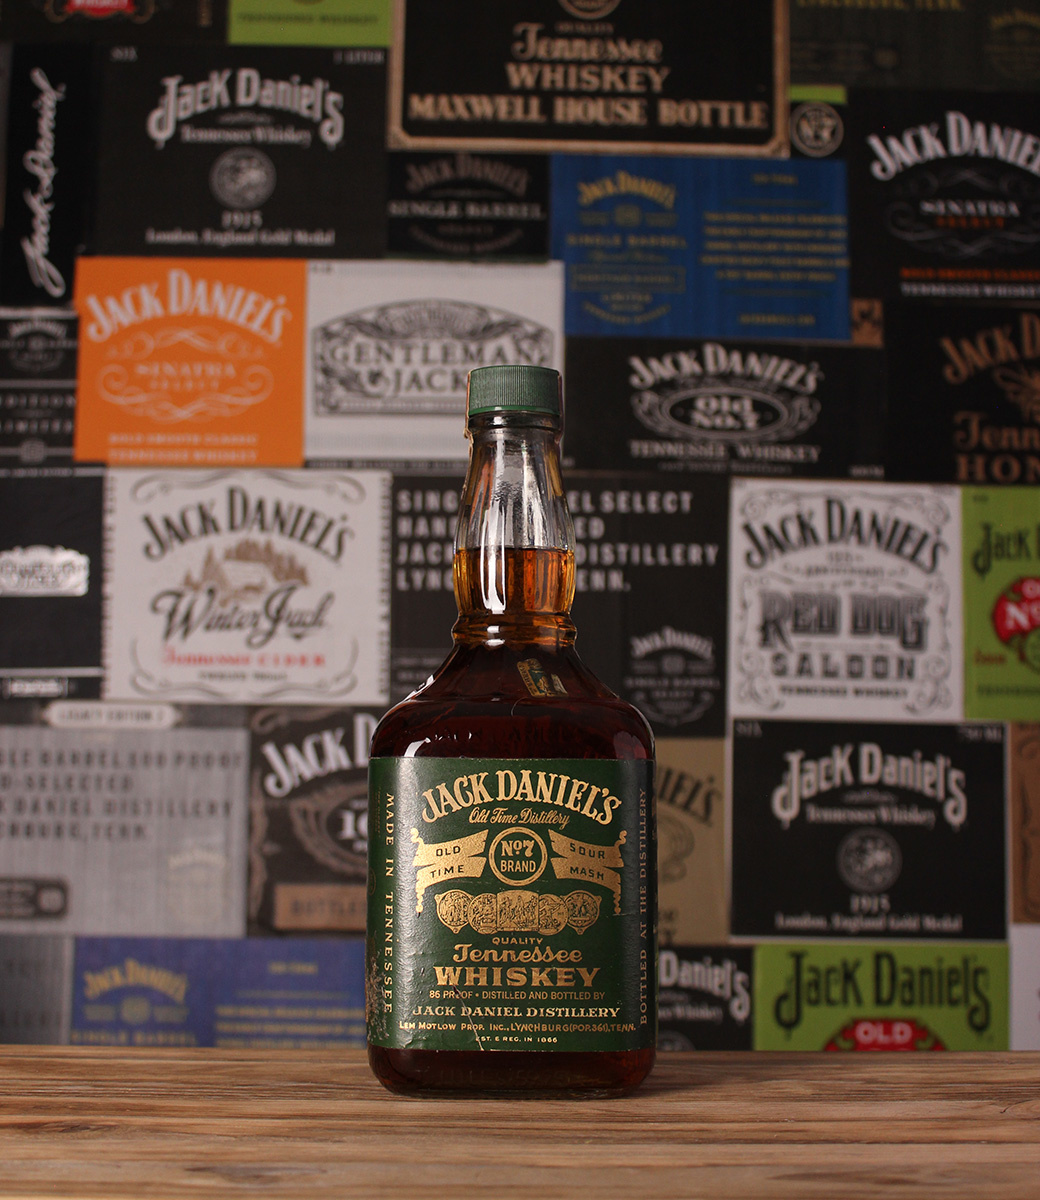 JACK DANIEL'S - Specials - Green label - 1750ml Transition - '81 - Stubby